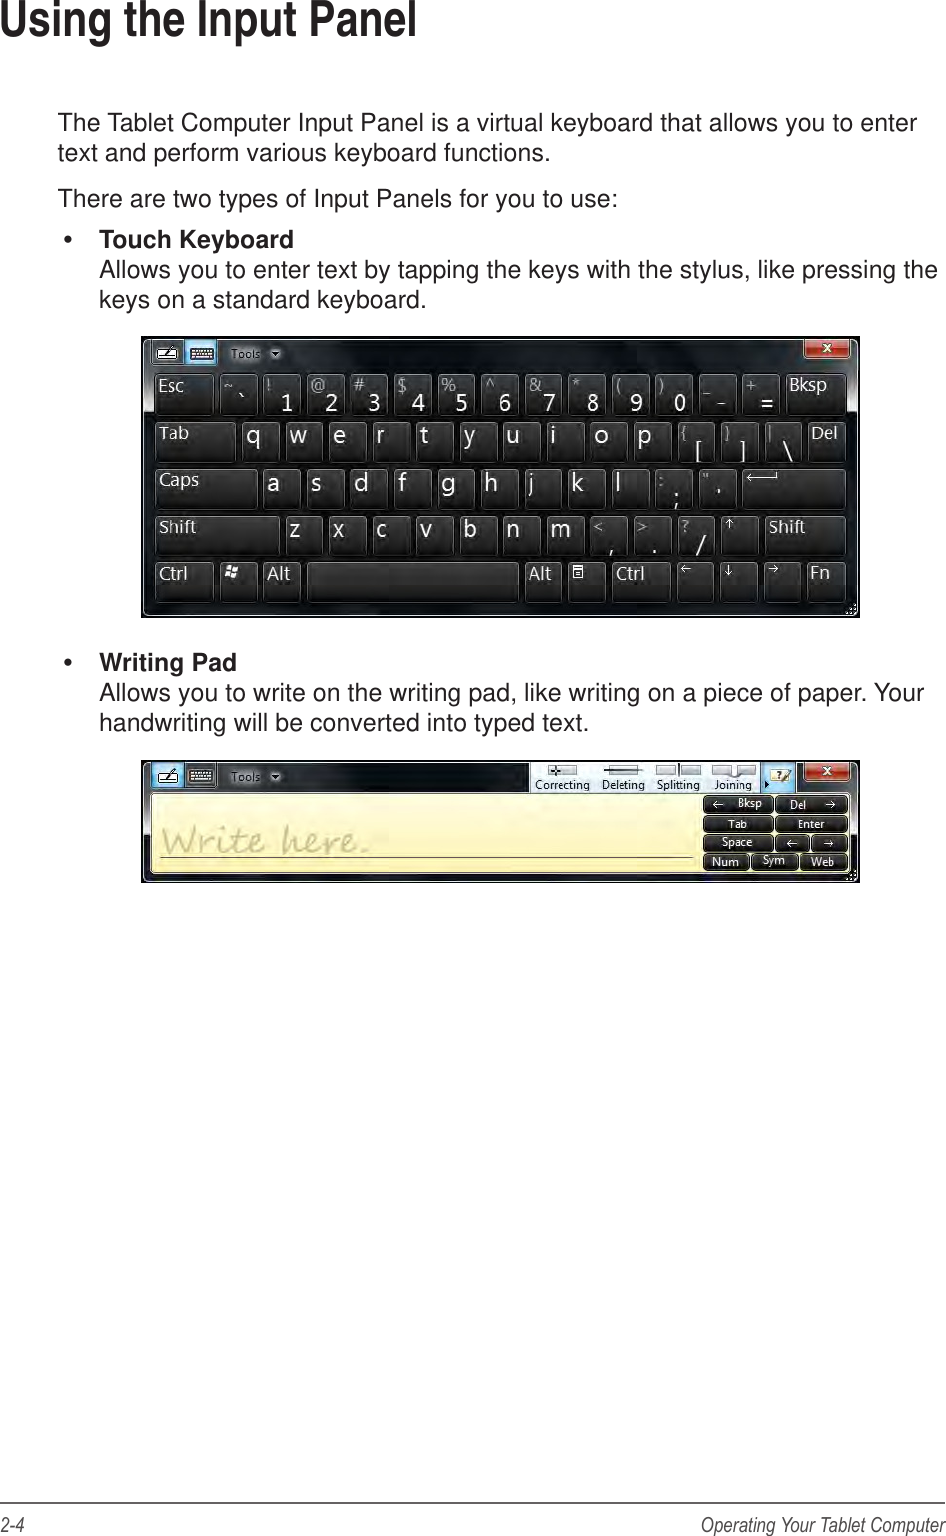 2-4 Operating Your Tablet ComputerUsing the Input PanelThe Tablet Computer Input Panel is a virtual keyboard that allows you to enter text and perform various keyboard functions.There are two types of Input Panels for you to use: Touch Keyboard Allows you to enter text by tapping the keys with the stylus, like pressing the keys on a standard keyboard. Writing Pad Allows you to write on the writing pad, like writing on a piece of paper. Your handwriting will be converted into typed text.